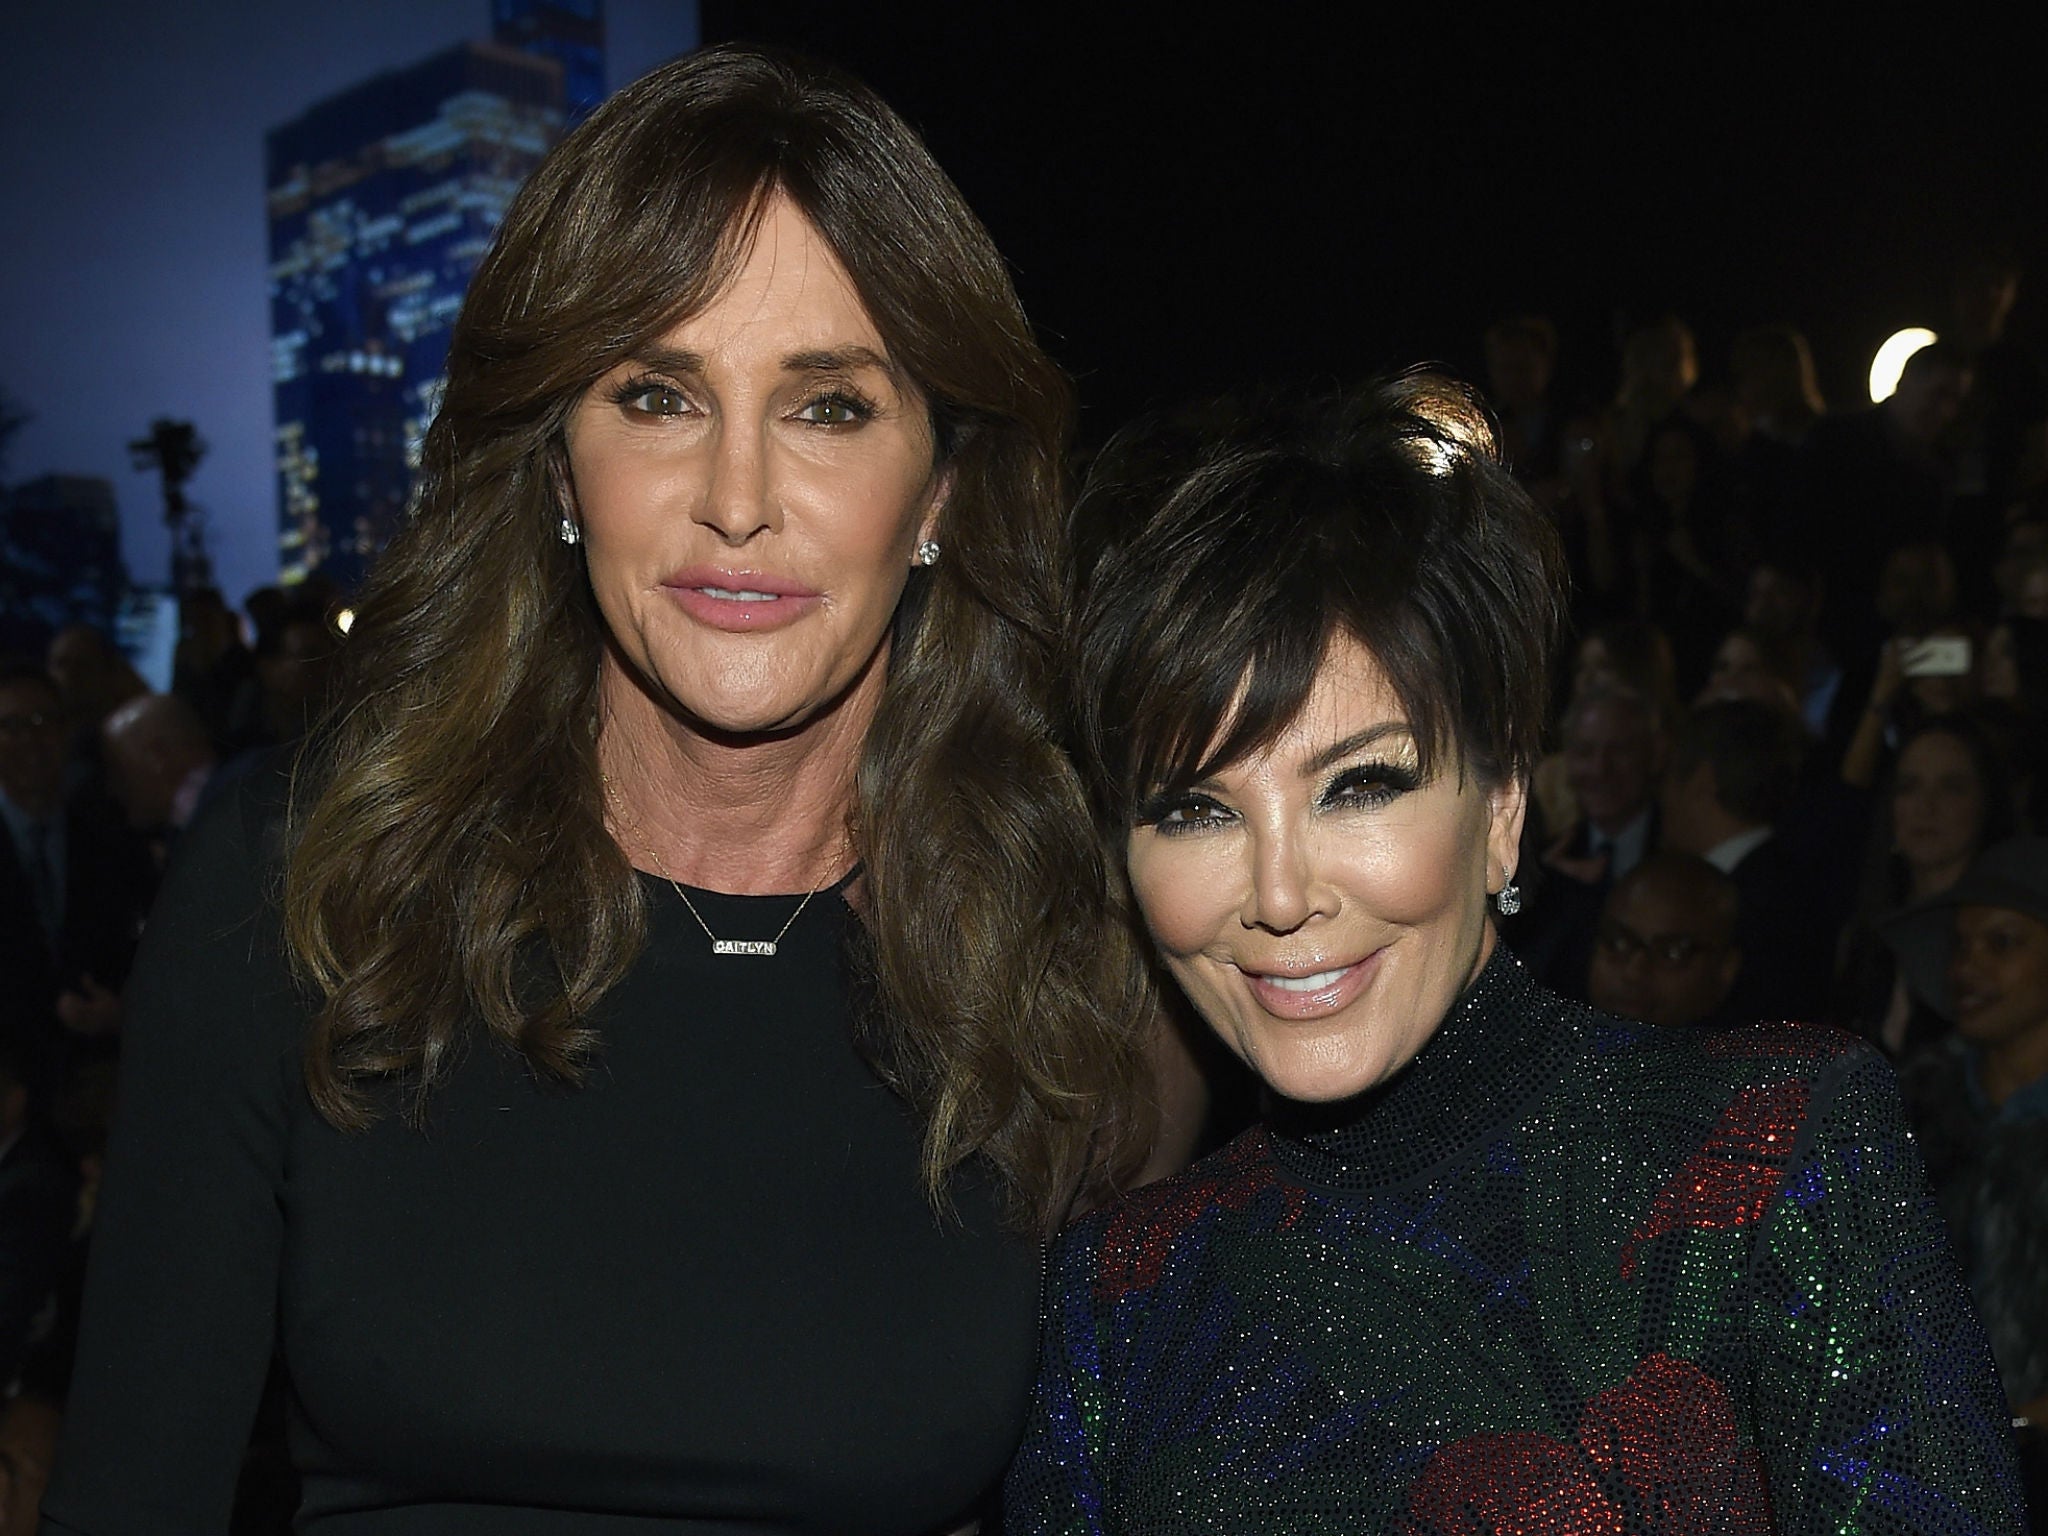 Caitlyn and Kris Jenner in November 2015 at the Victoria's Secret Show